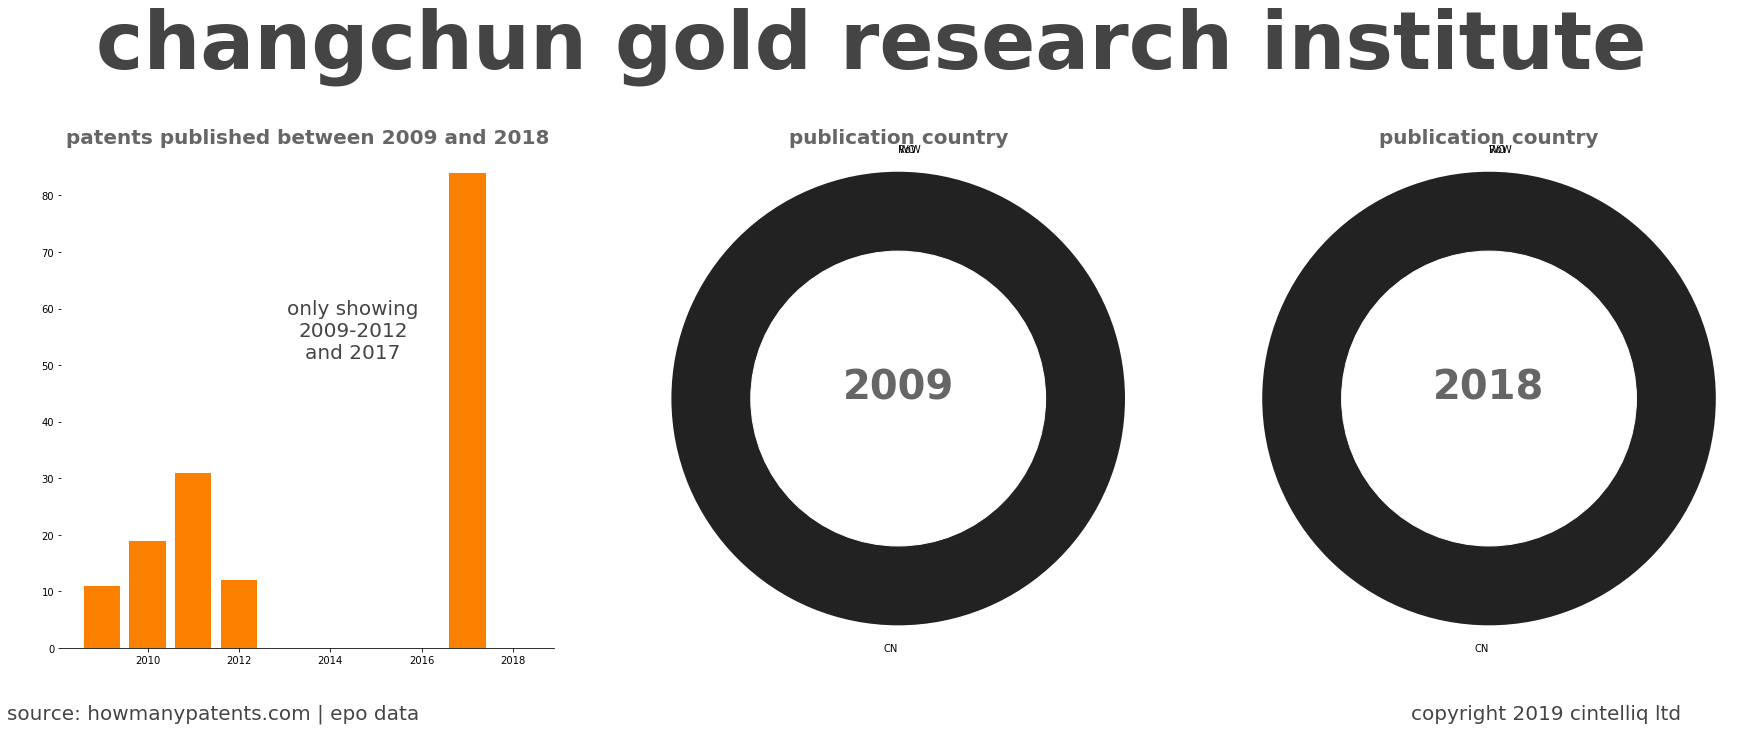 summary of patents for Changchun Gold Research Institute